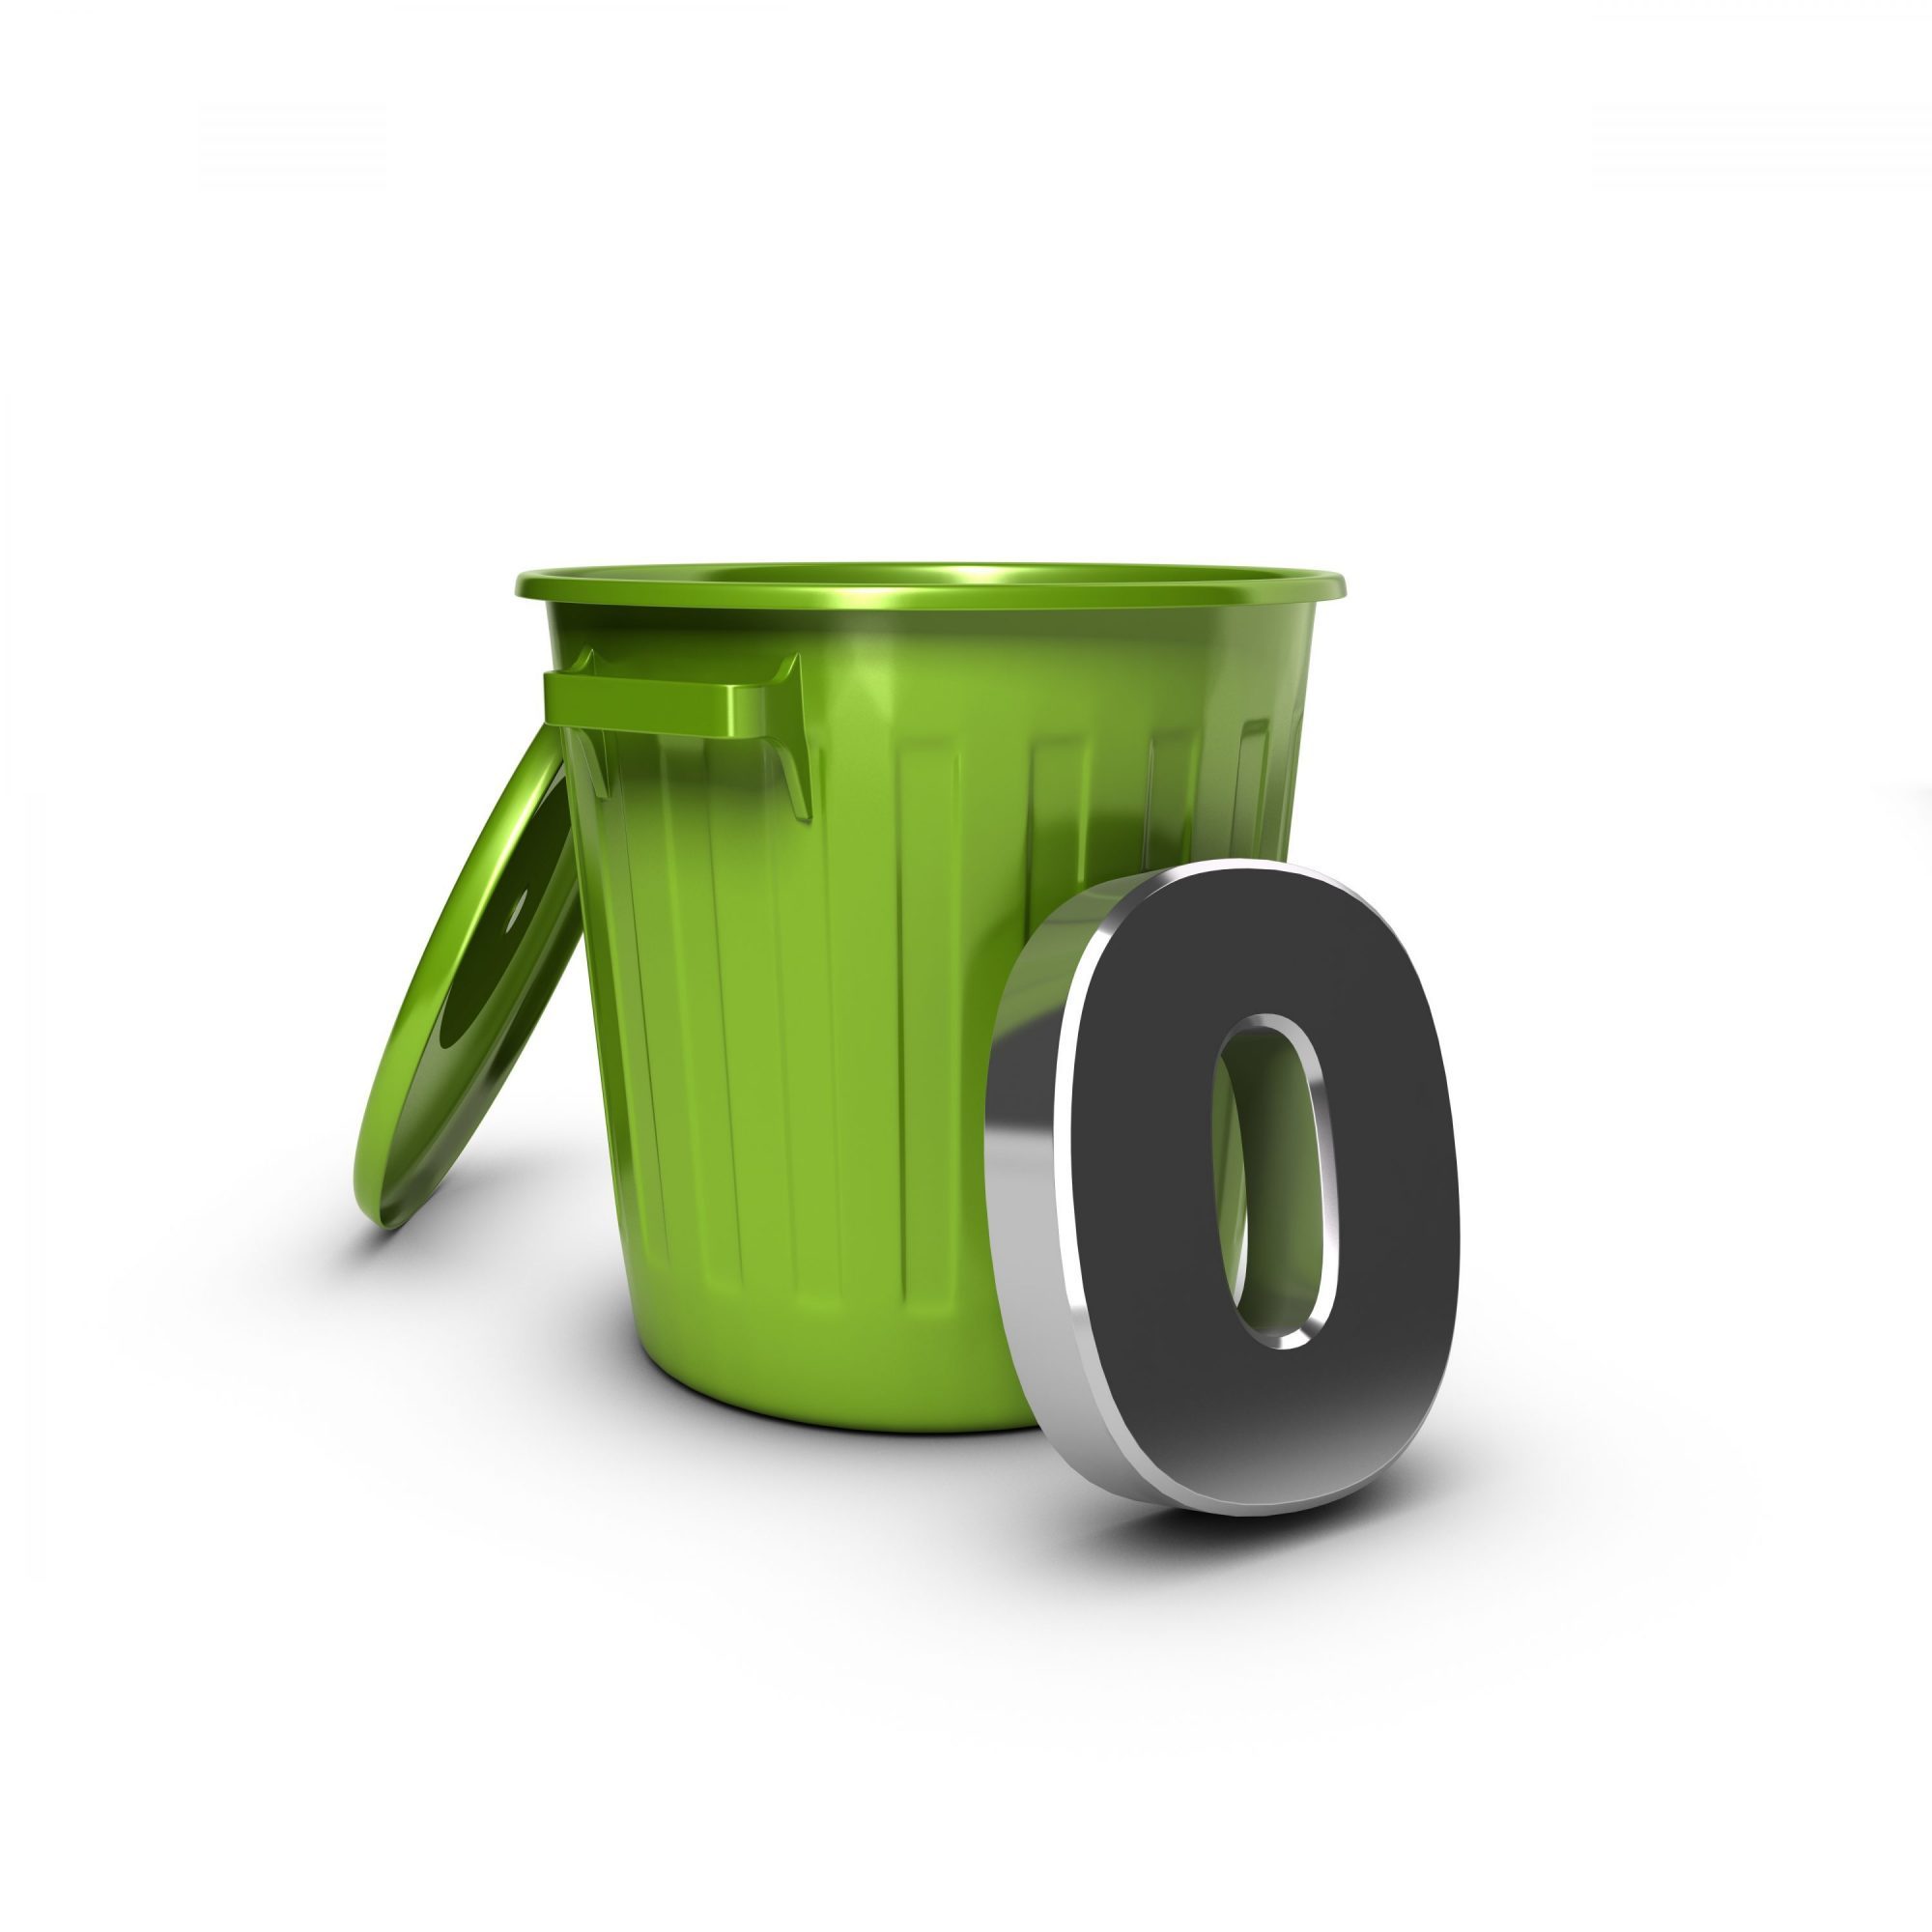 Number zero against a green bin. Concept illustration for zero waste objective.